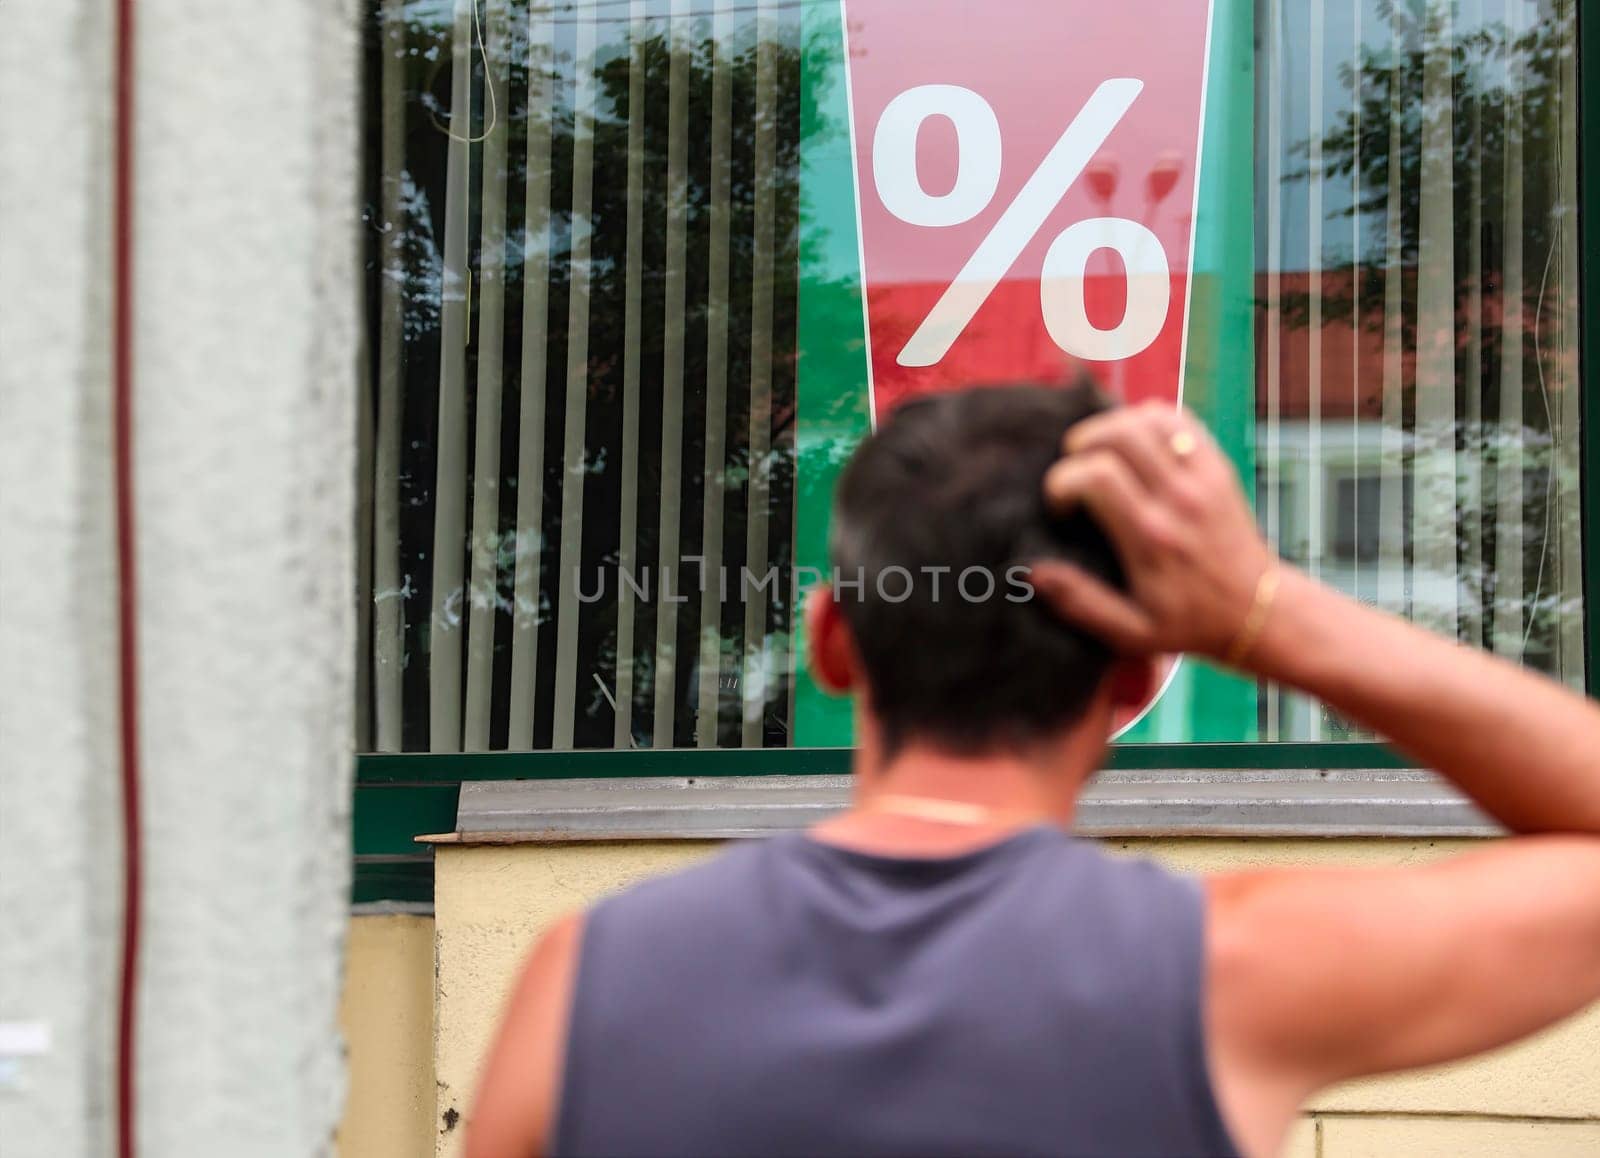 A man is standing outside a store, scratching his head as he observes a large percentage sign displayed in the window. His posture suggests he might be puzzled or considering the implications of the advertised discount, sale, or promotion.